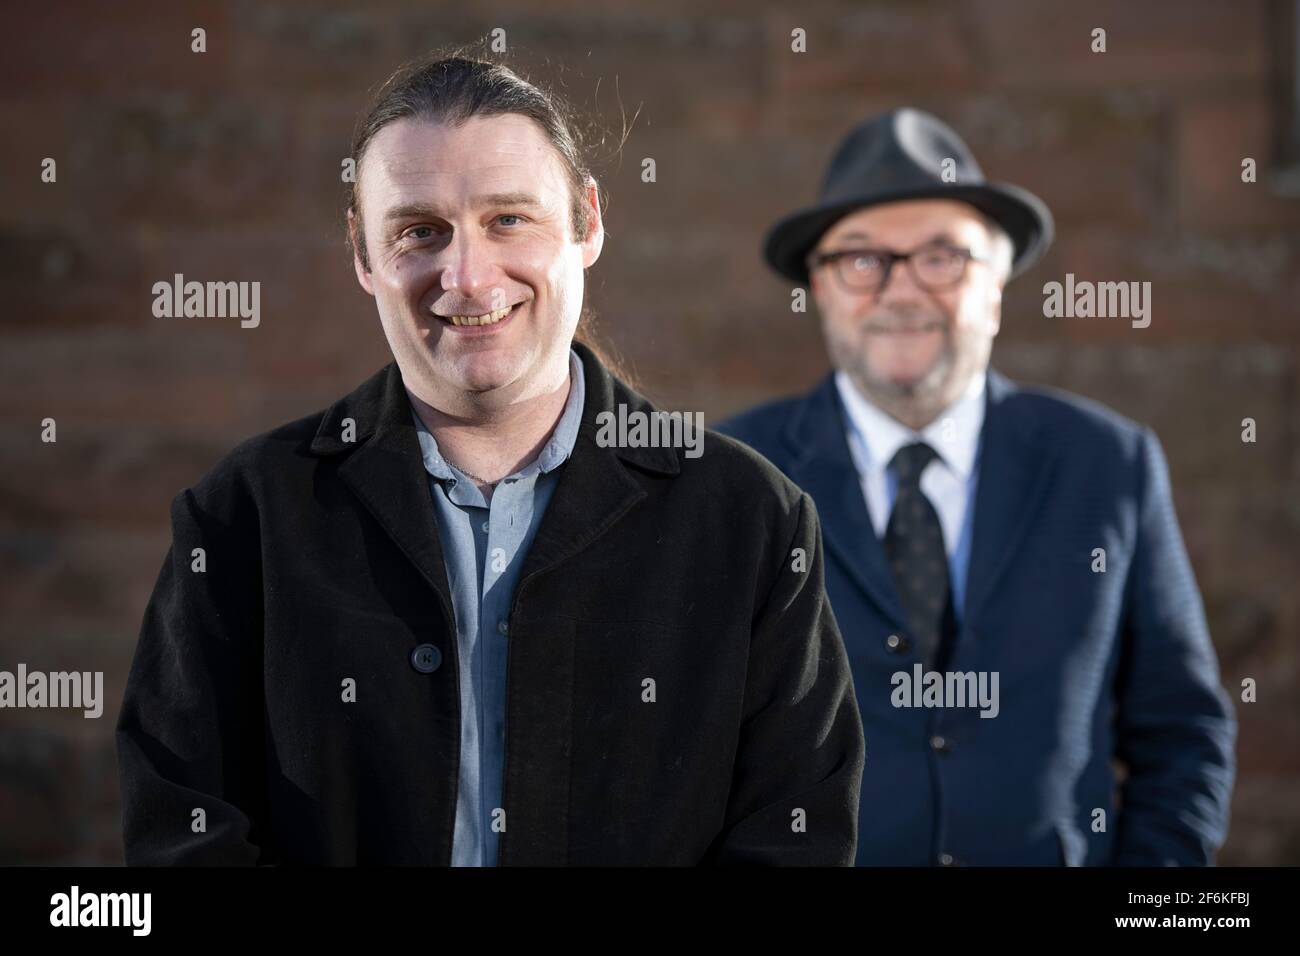 Scone, Perth, Scotland, UK. 1st Apr, 2021. PICTURED: (L-R) James Glen - Candidate, George Galloway - Leader of All For Unity Party. Exclusive images of George Galloway, Leader of the Alliance For Unity Party. George Galloway is a British Politician, Broadcaster and writer. He currently presents the Mother of all Talk Shows on Radio Sputnik and Sputnik on RT UK. He is photographed for his official Party portrait for the 6th May Scottish Parliament Holyrood Elections. Pic Credit: Colin Fisher/Alamy Live News Stock Photo